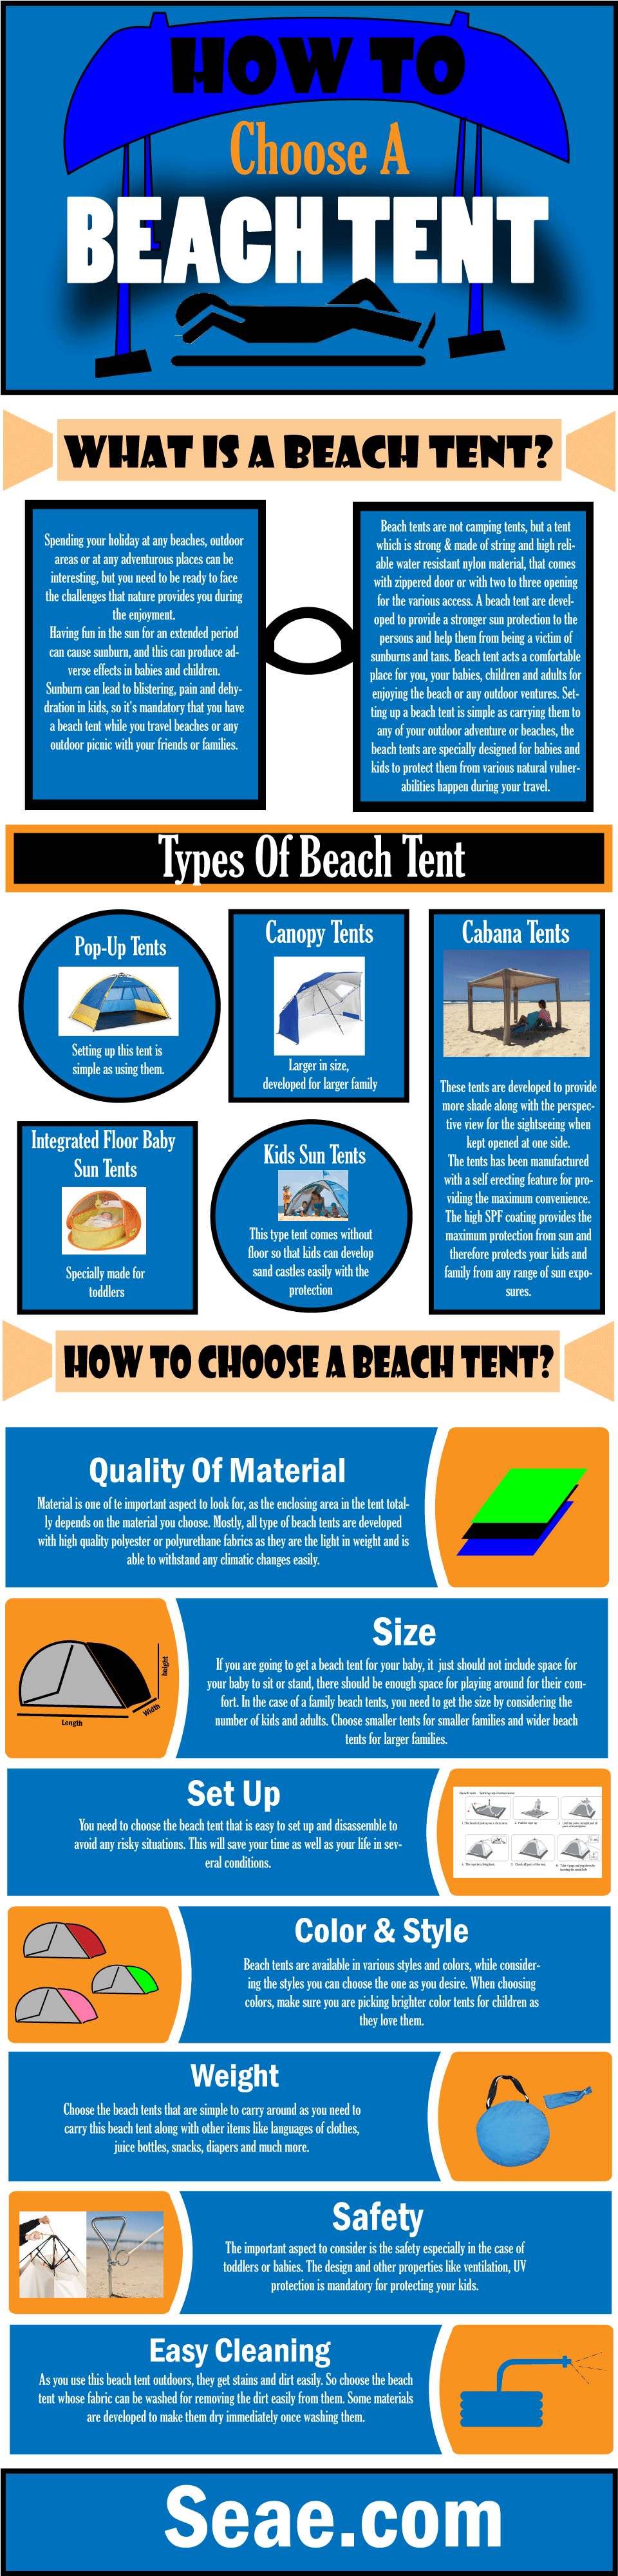 How To Choose a Beach Tent